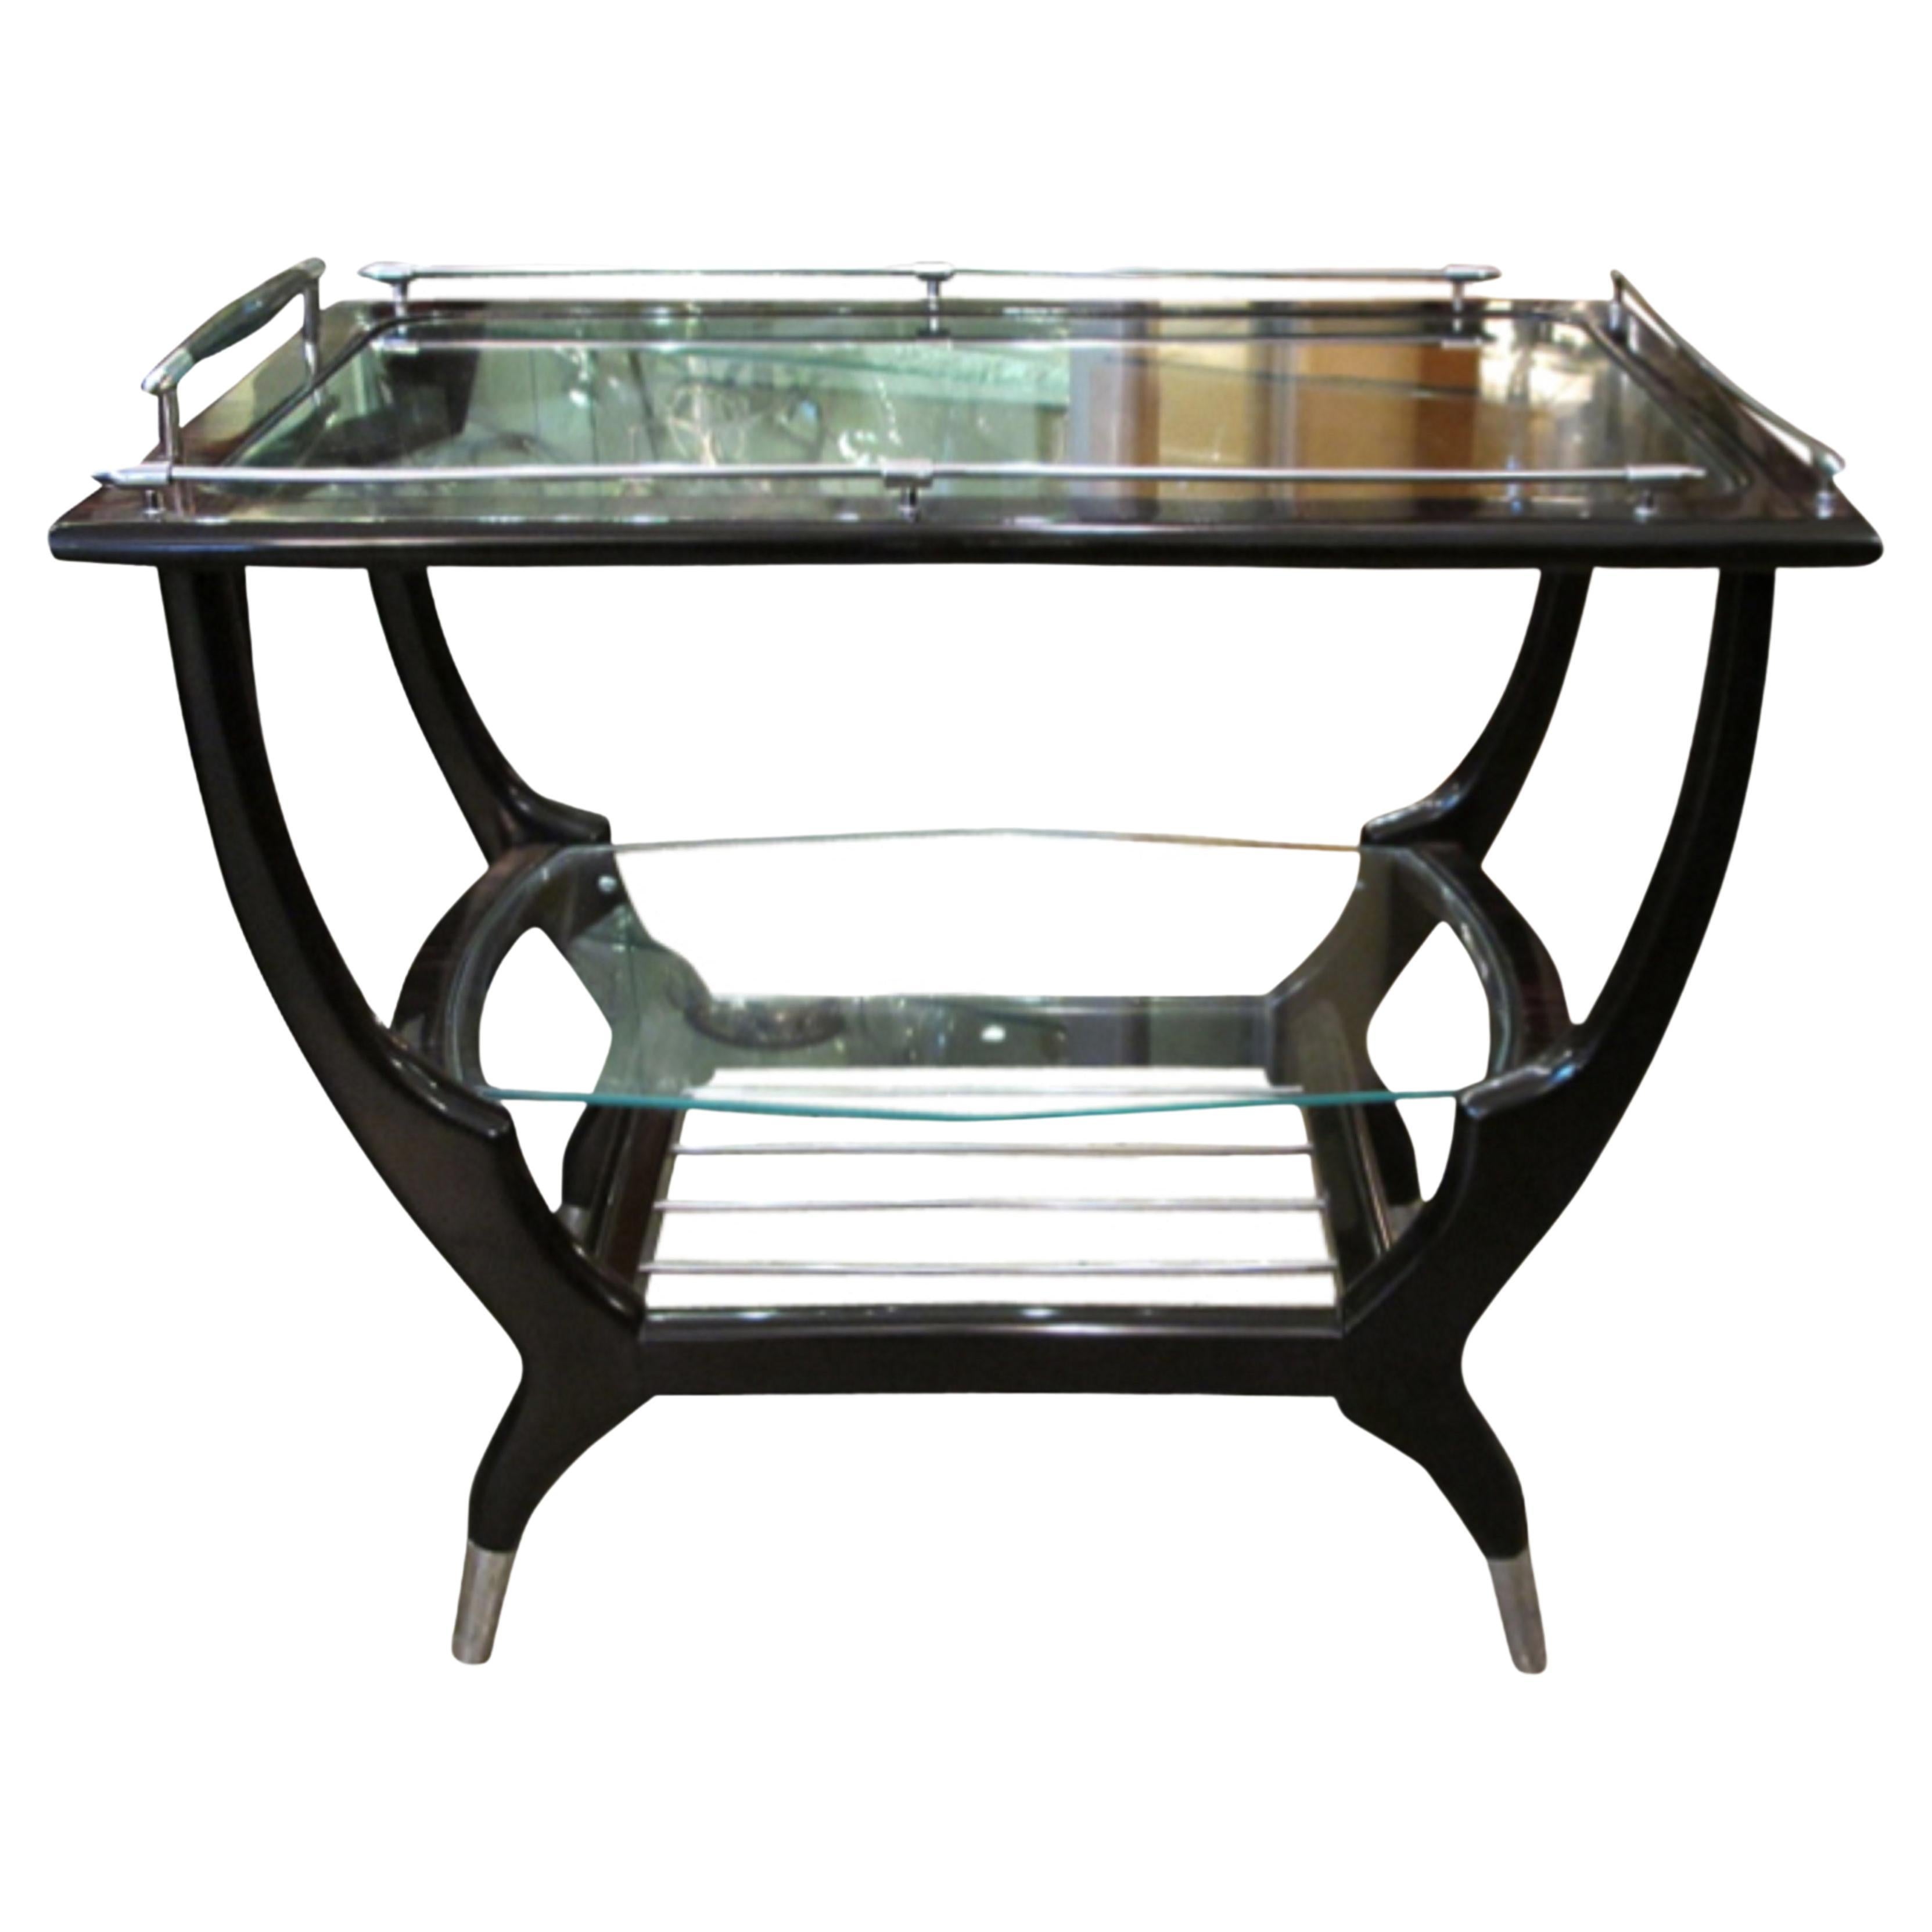 Amaizing Italian Table 1960 in Wood, Chrome and Glass For Sale